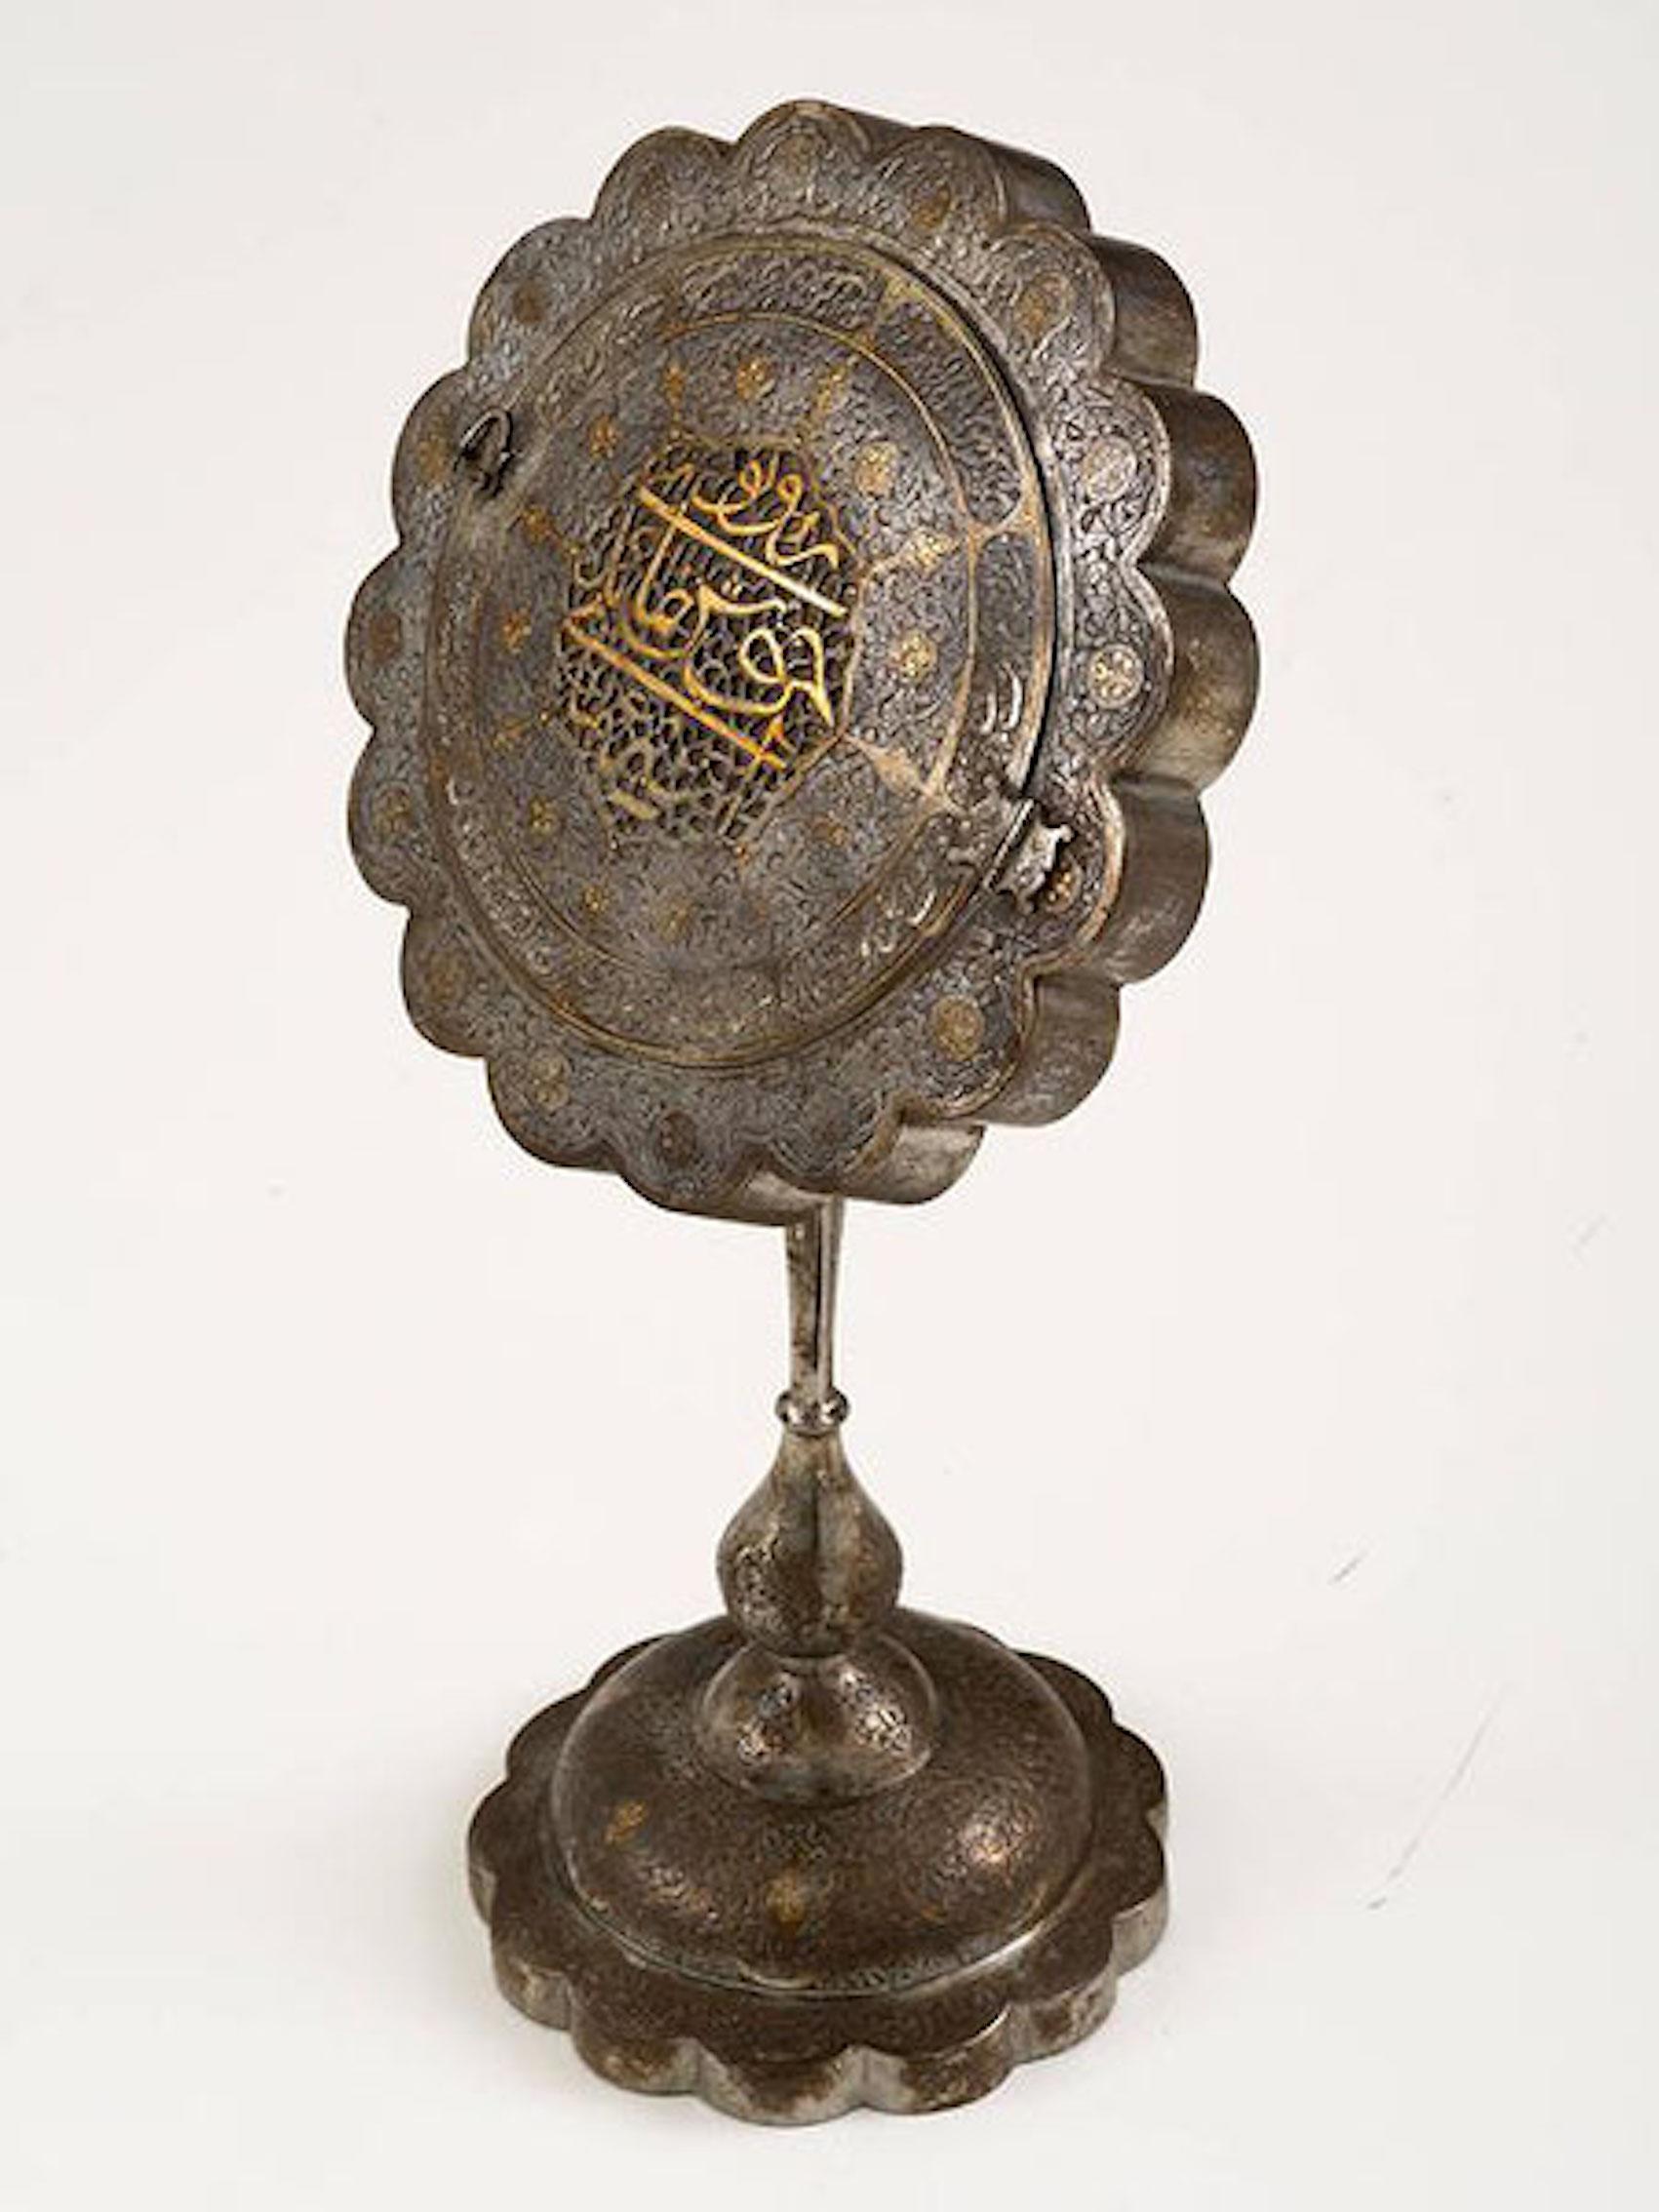 Persian Qajar period mirror stand made of engraved and gold damascened steel, with gold inlay and inscription on front. Iran : circa 1850. A similar example can be found in the British Museum Collection Provenance from the Estate of Seward Kennedy.